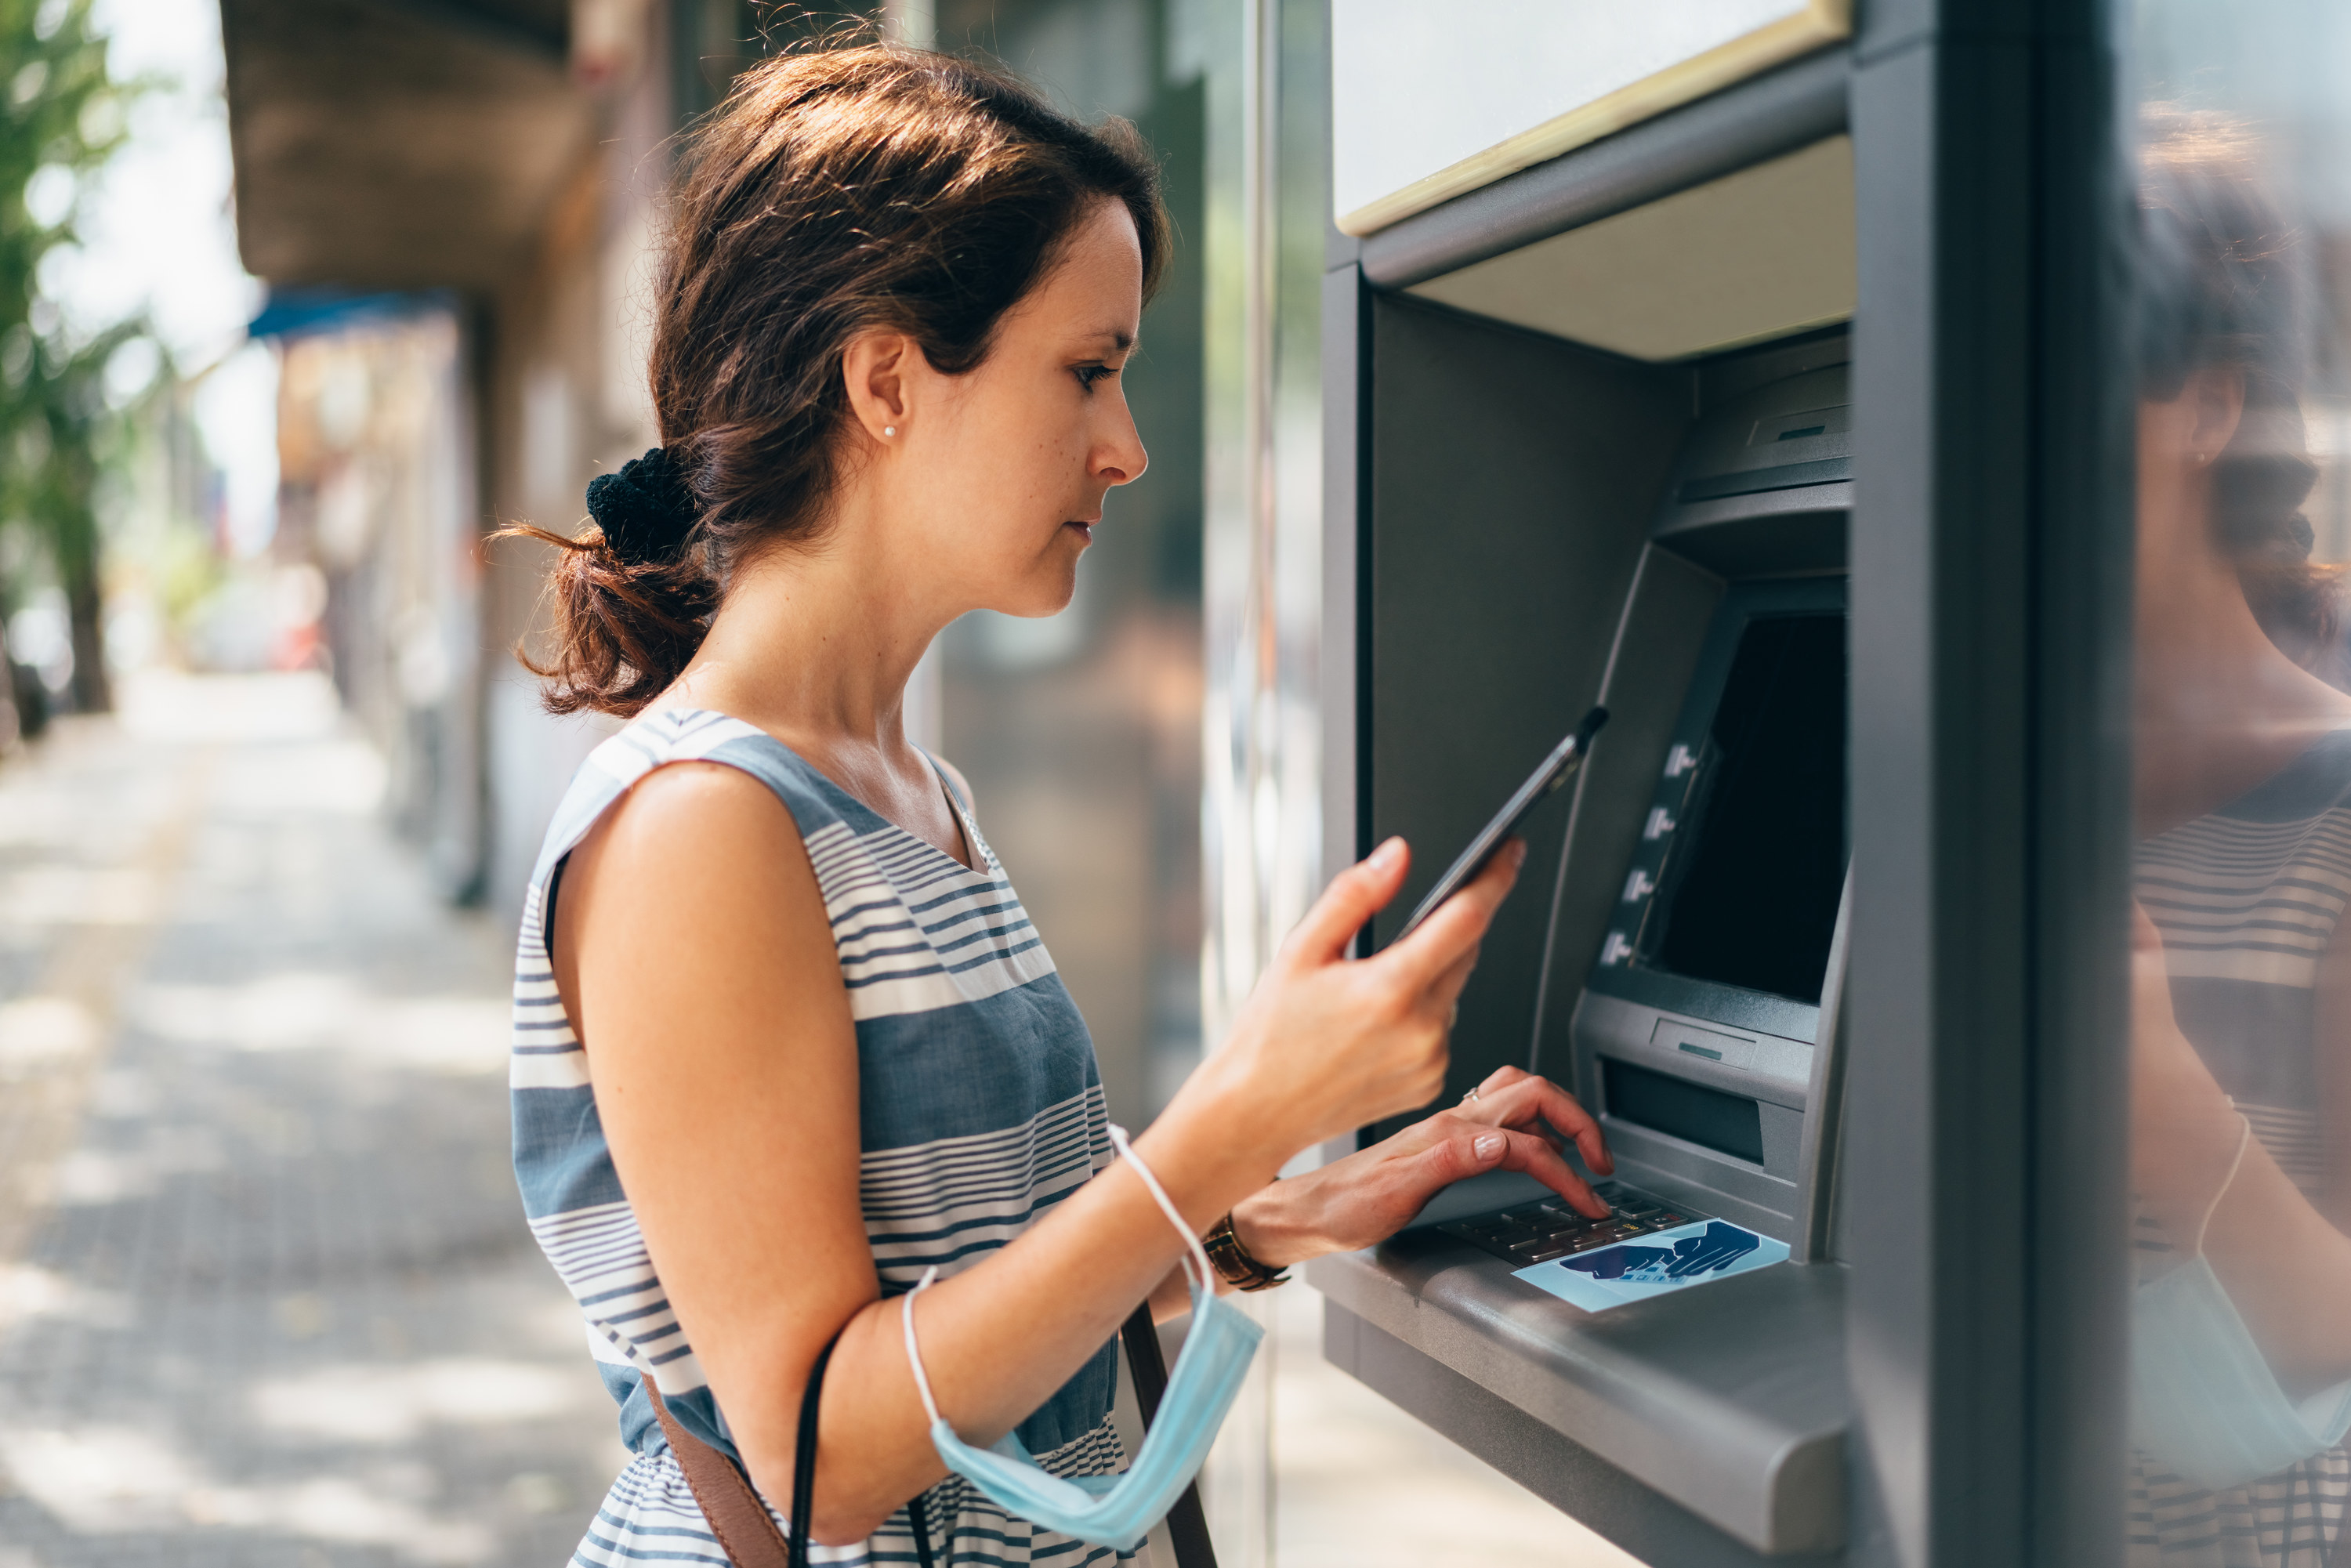 Woman at ATM with her phone